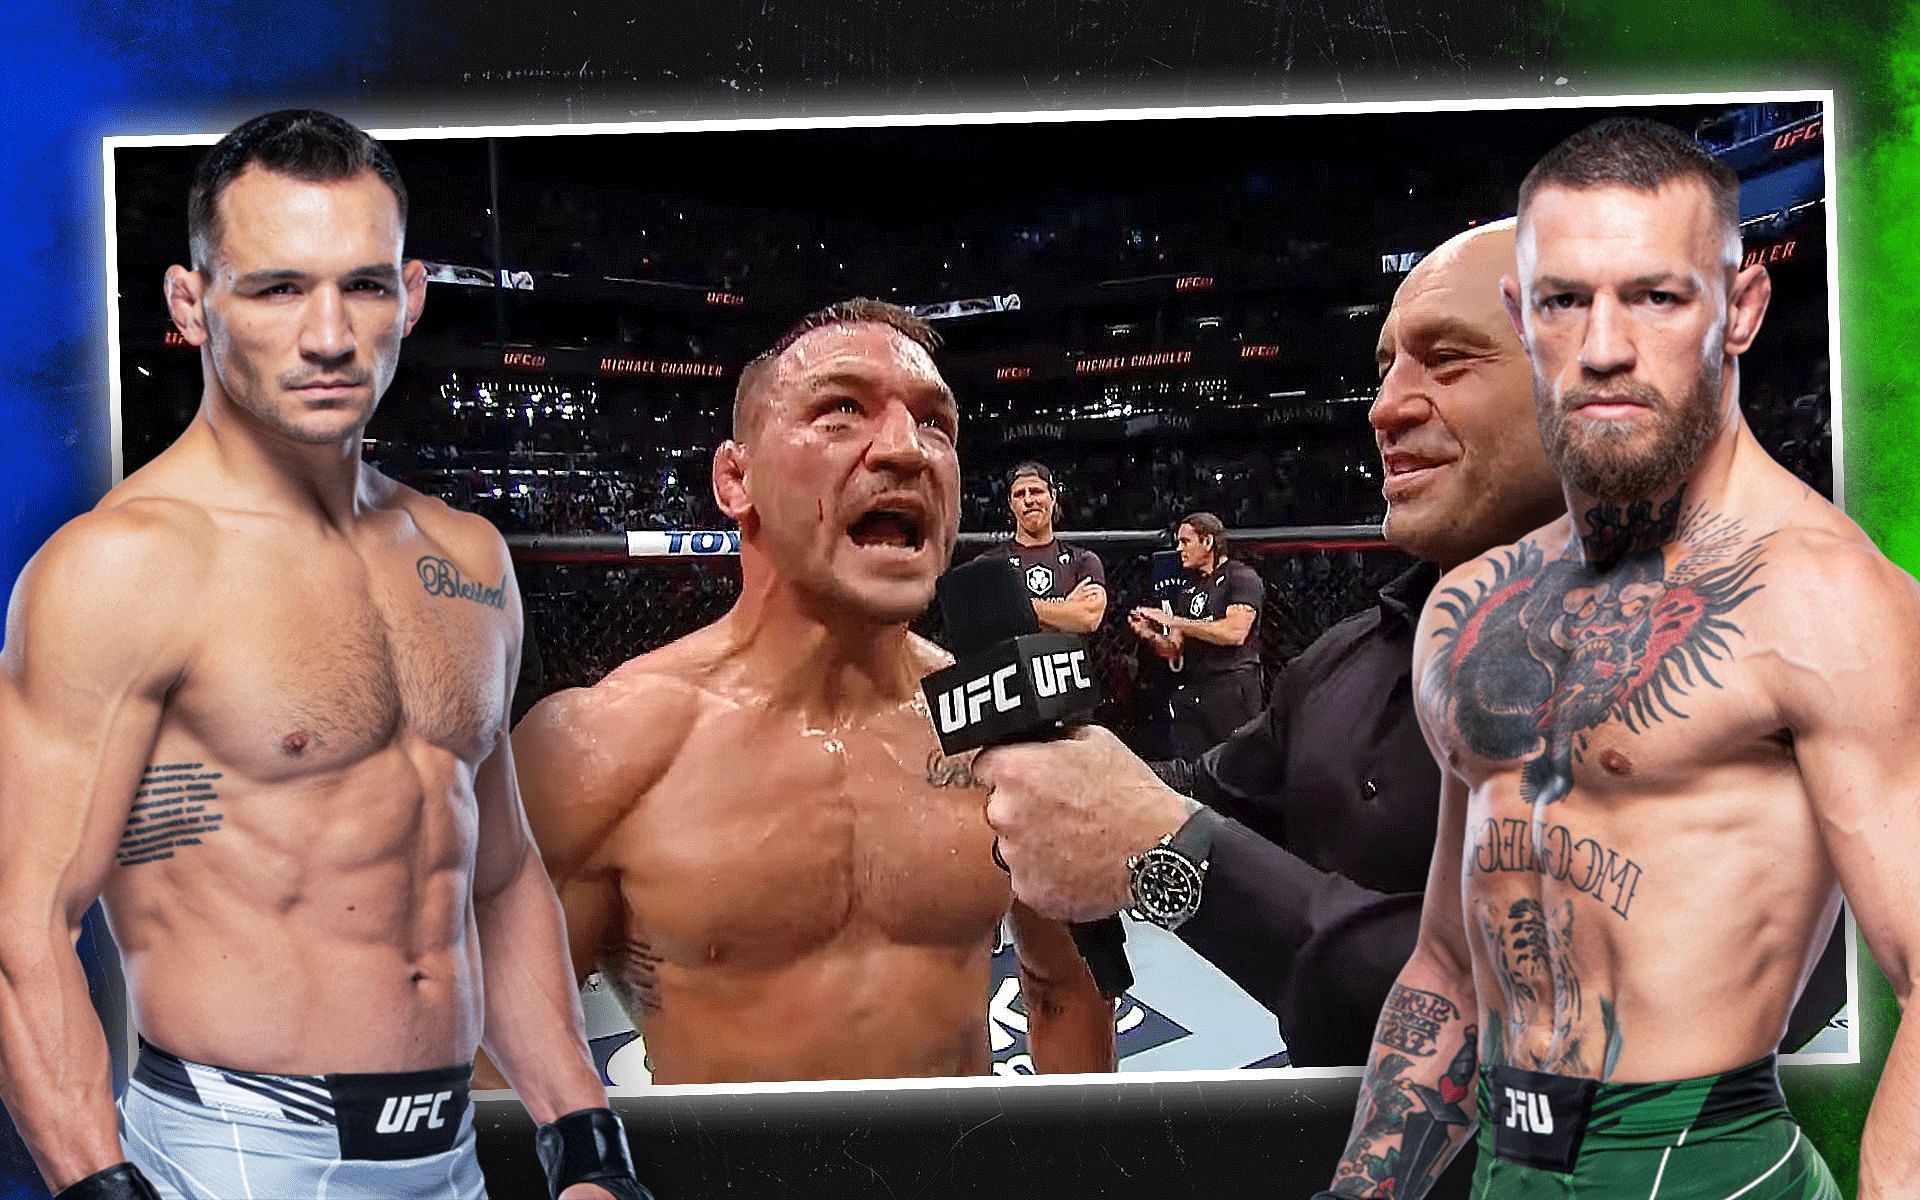 Will we see Conor McGregor (right) and Michael Chandler (left and center) sharing the octagon next? [Image courtesy - UFC on YouTube and ufc.com]